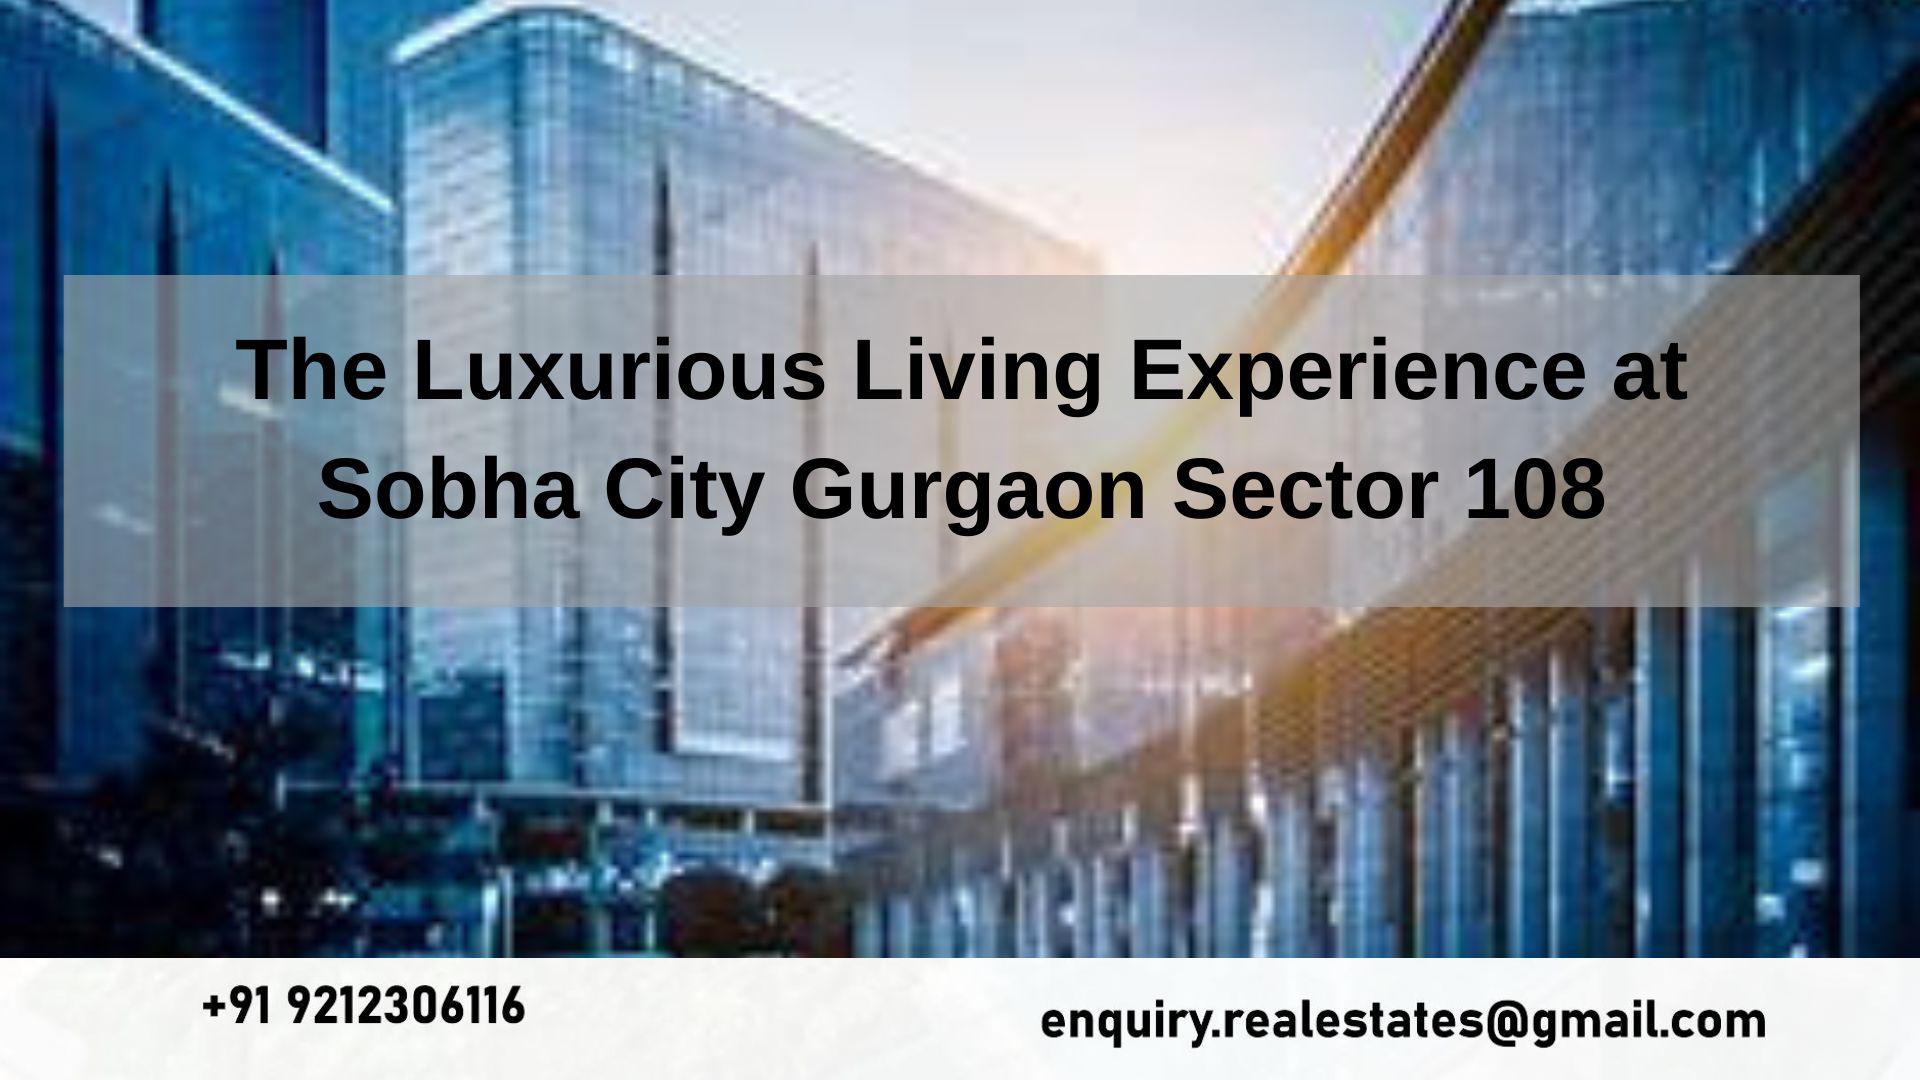 The Luxurious Living Experience at Sobha City Gurgaon Sector 108